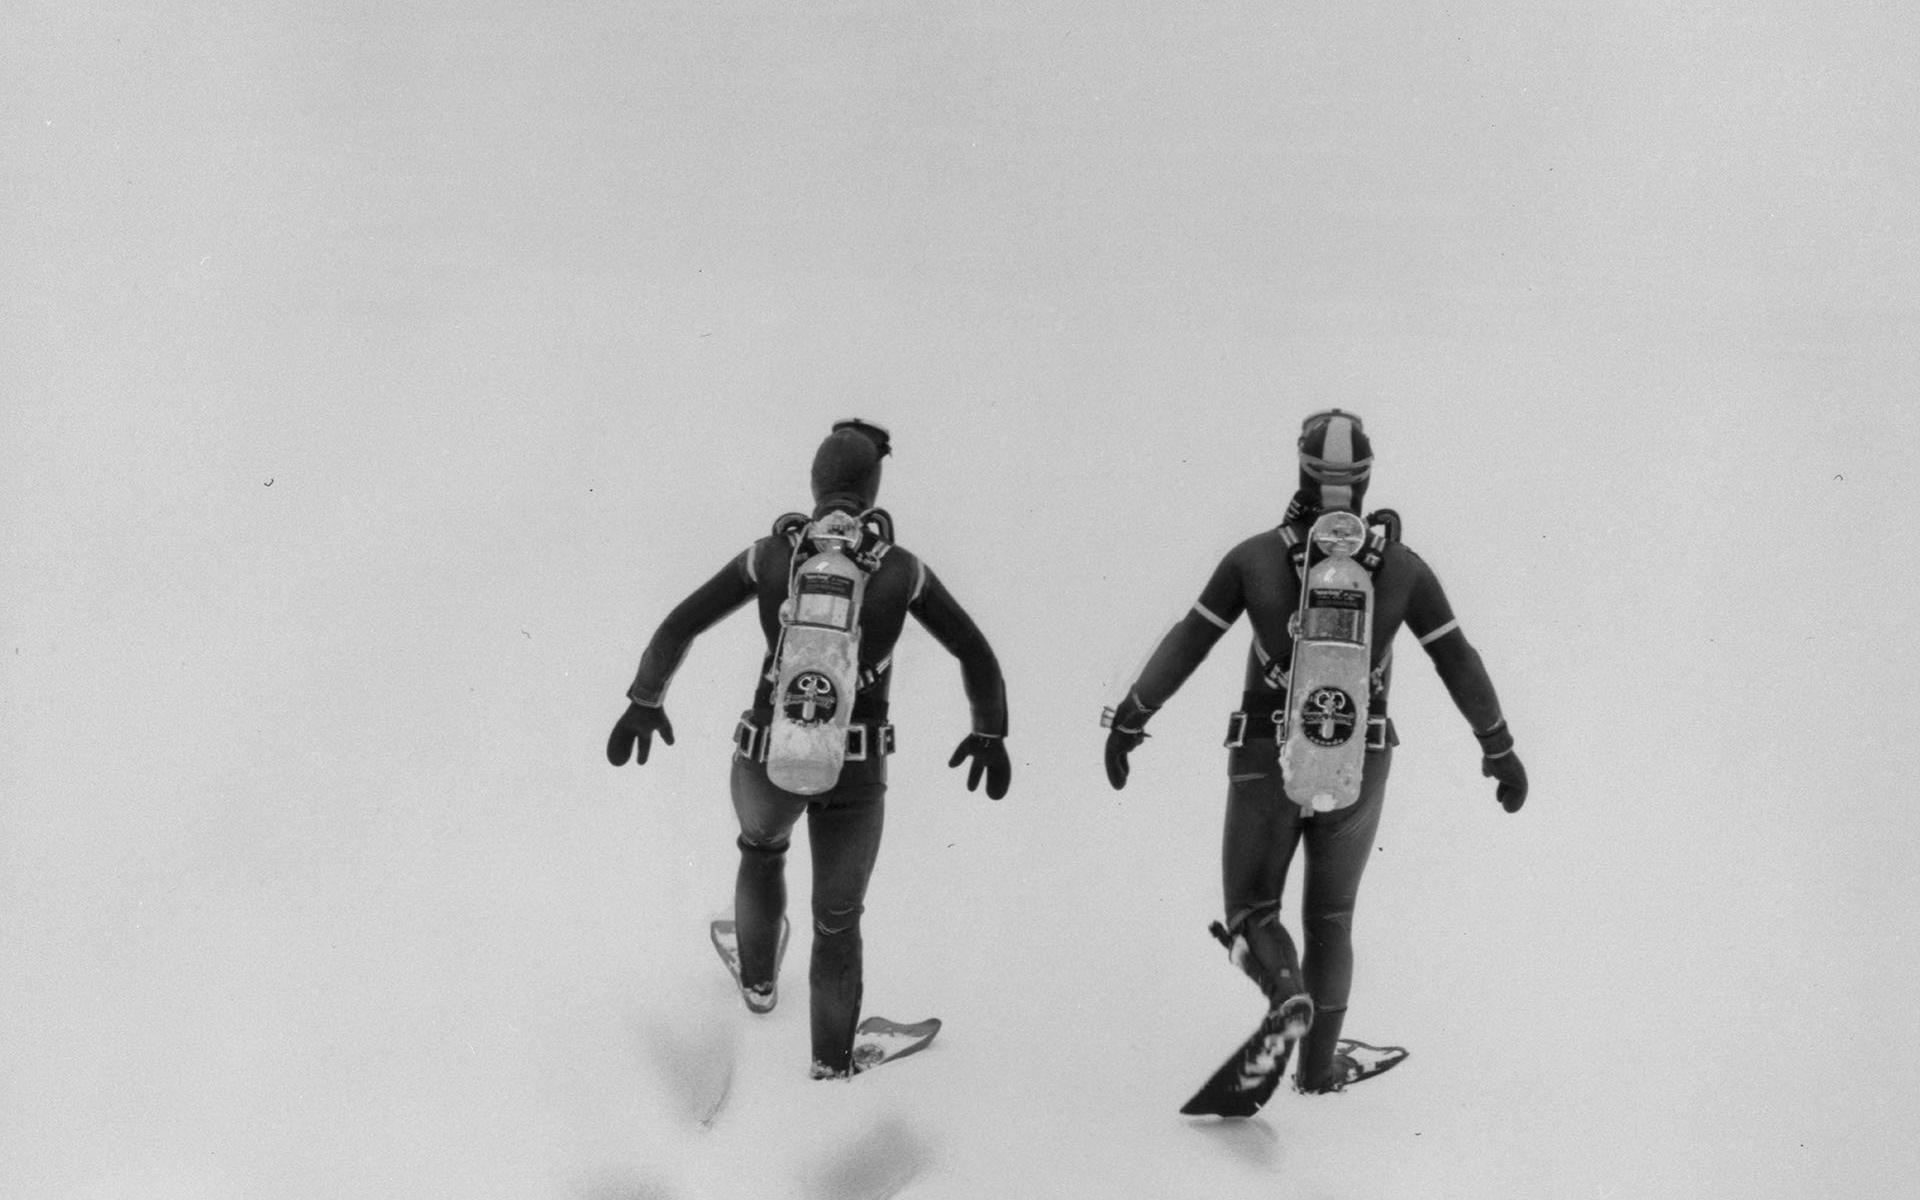 Two scuba divers, seen from behind, walking across snow